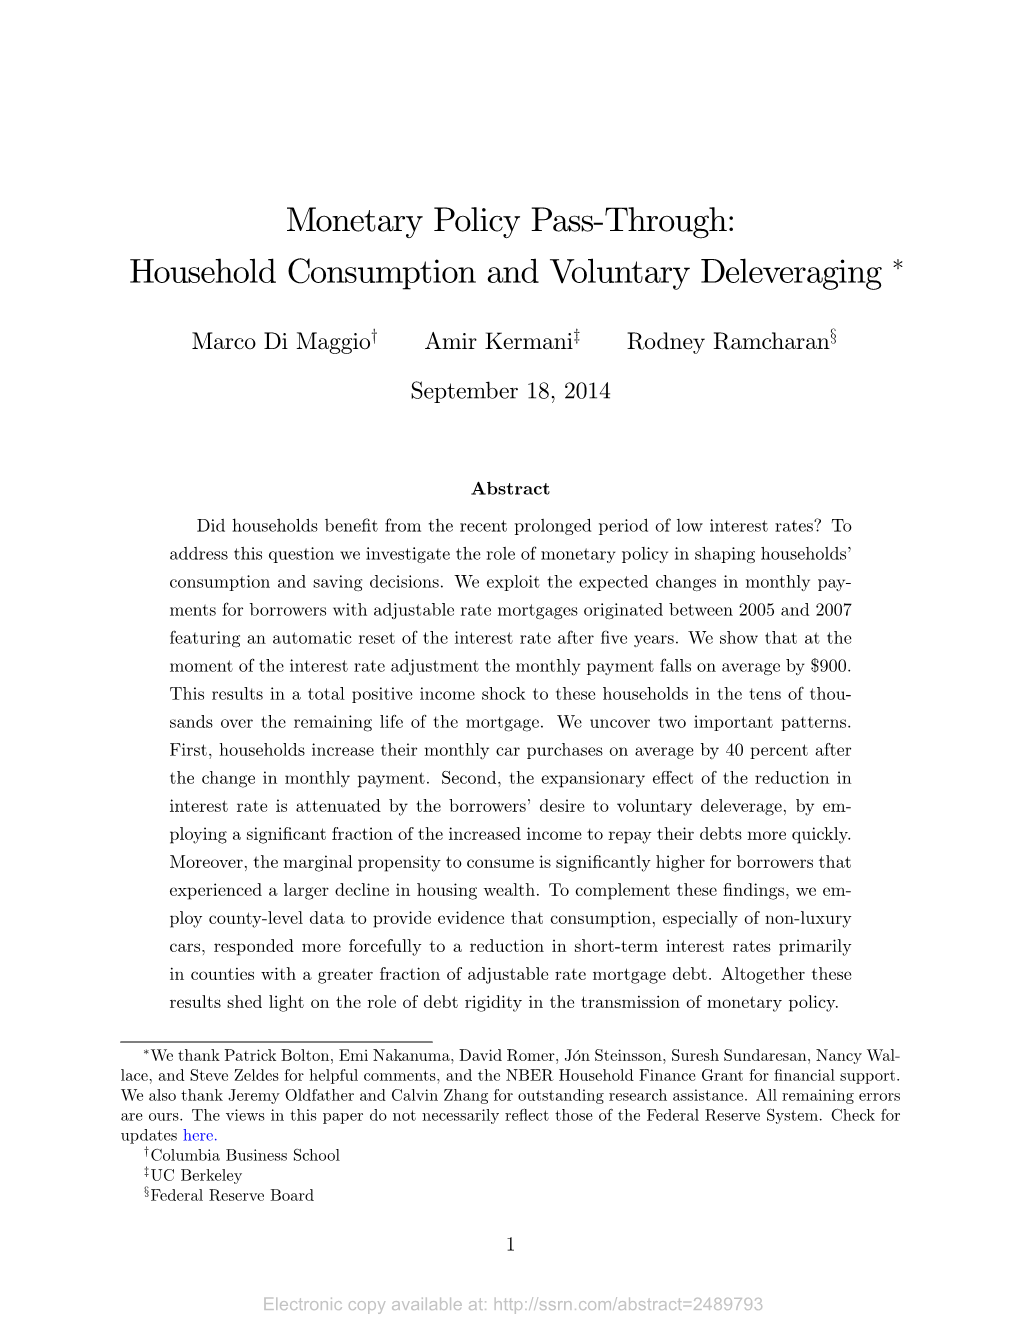 Monetary Policy Pass-Through: Household Consumption And